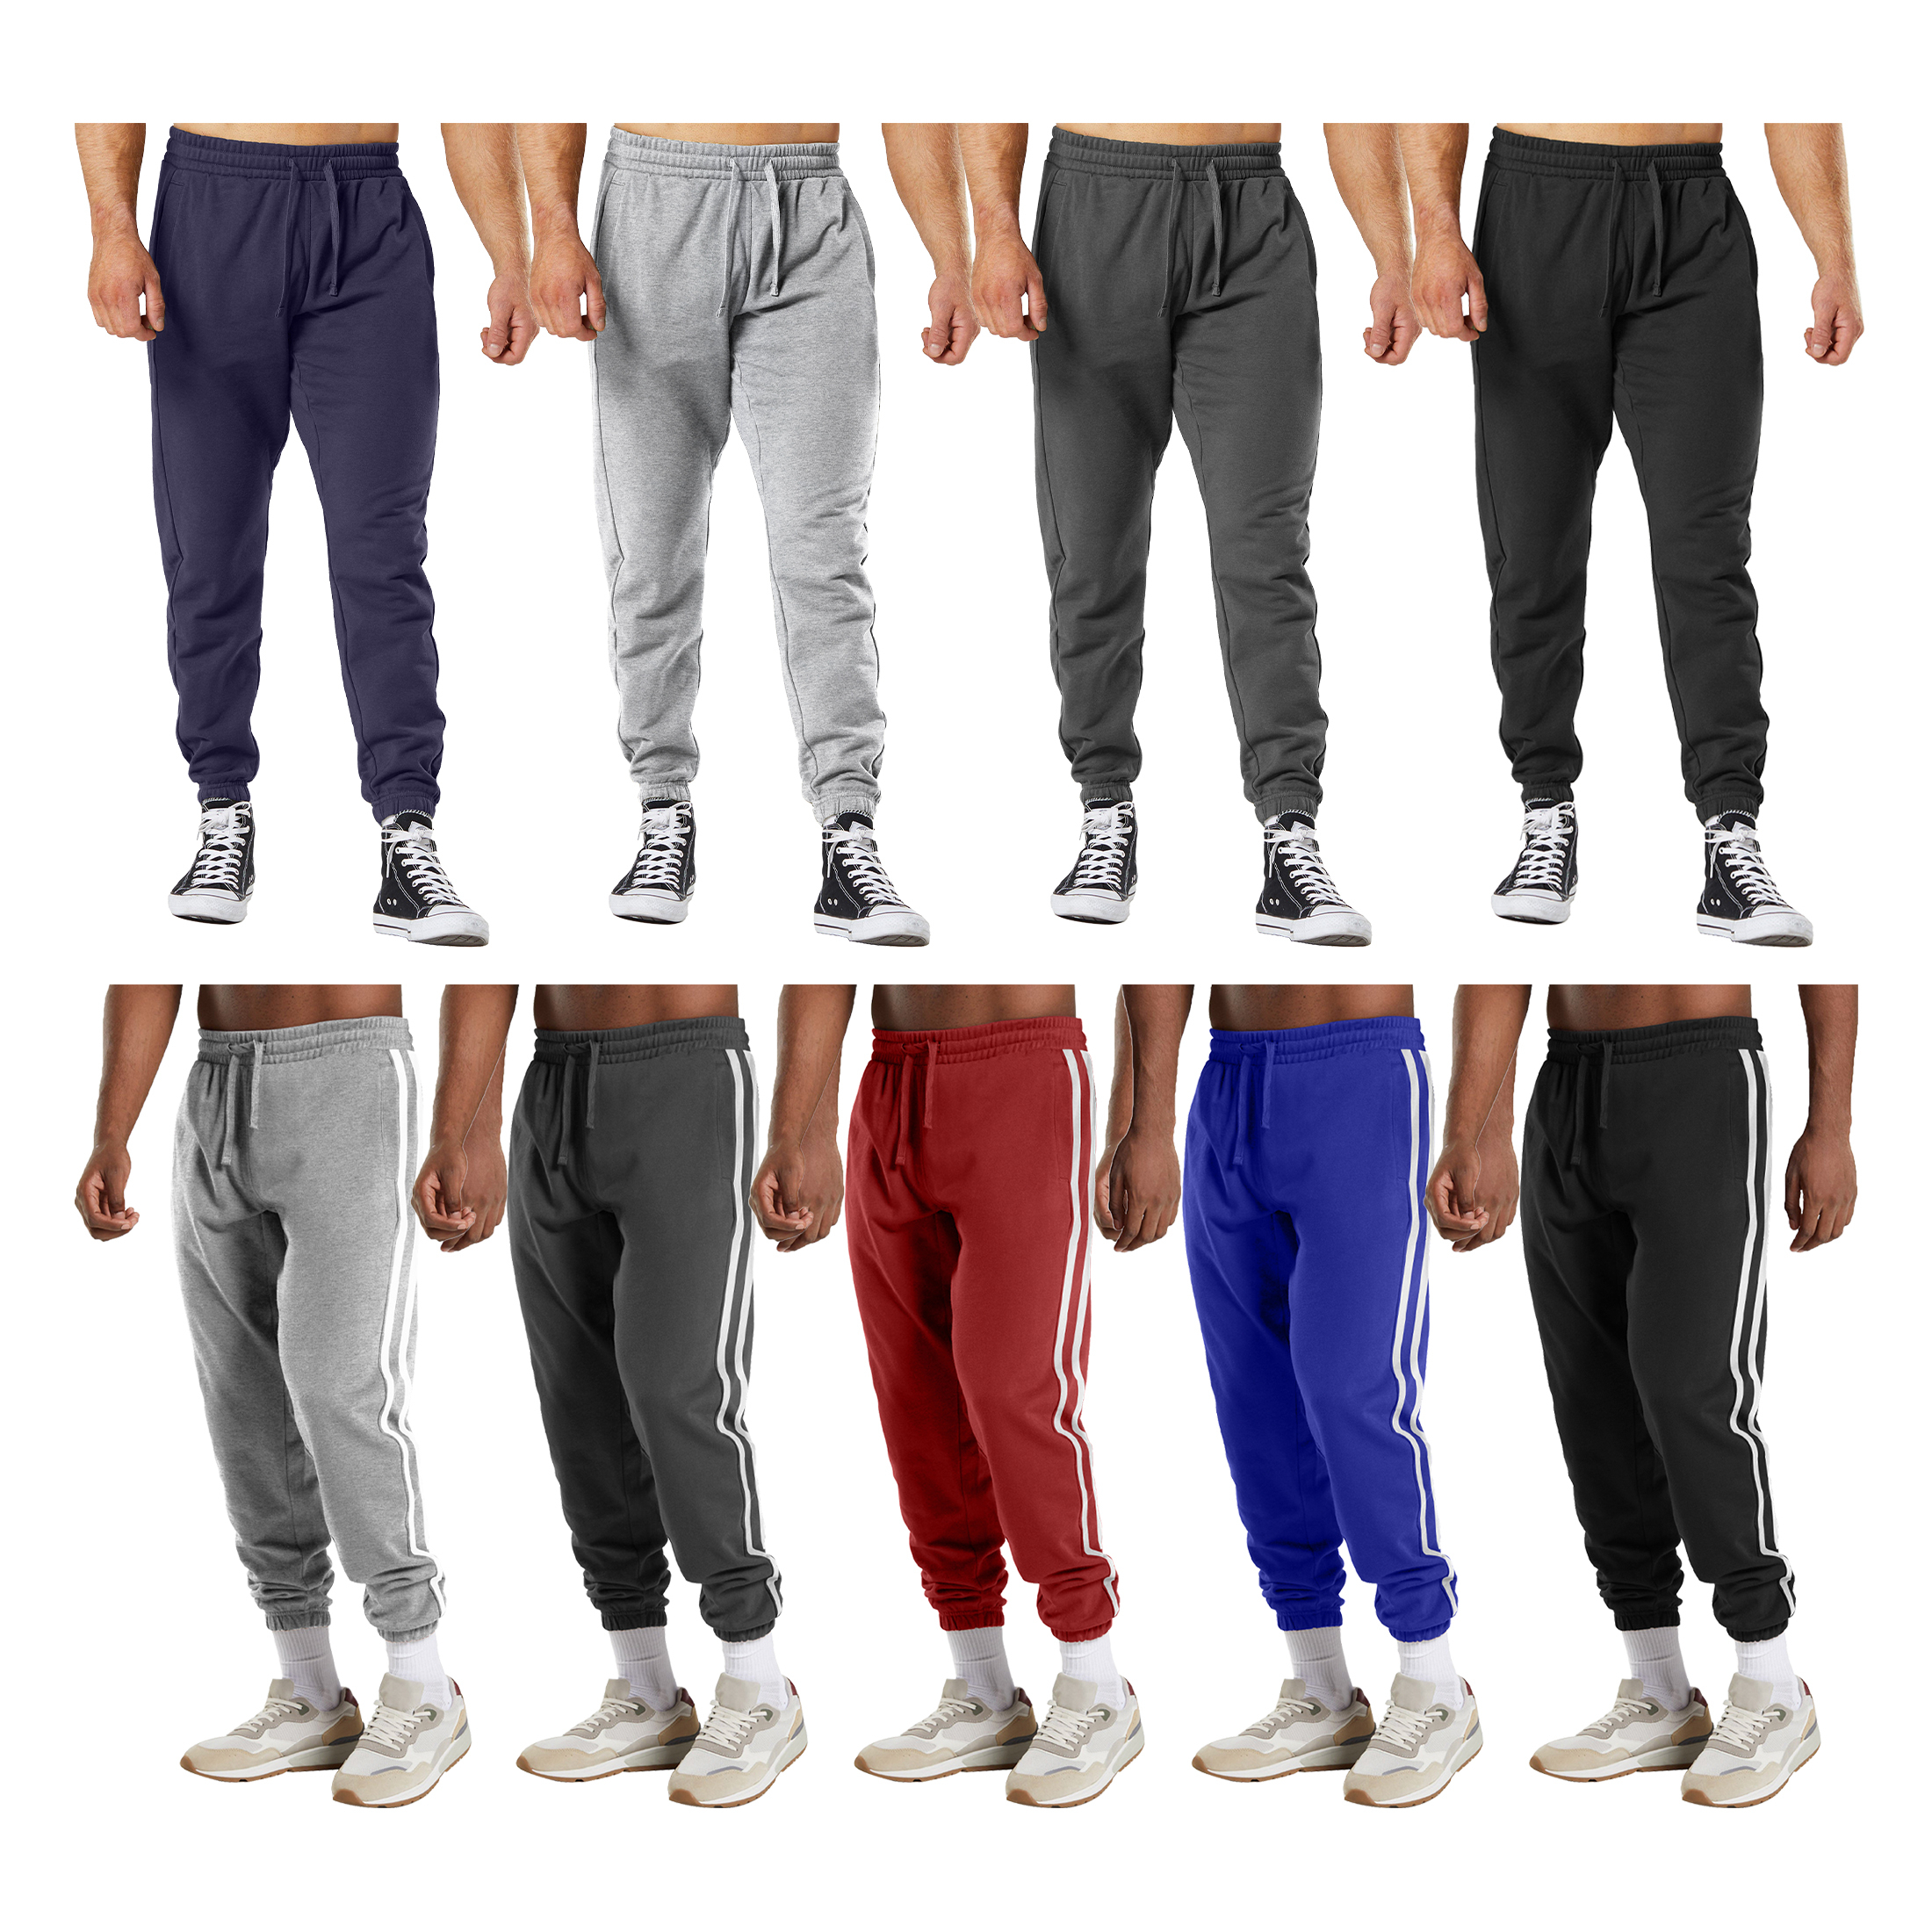 3-Pack: Men's Casual Fleece-Lined Elastic Bottom Sweatpants Jogger Pants With Pockets - Solid & Stripes, Large